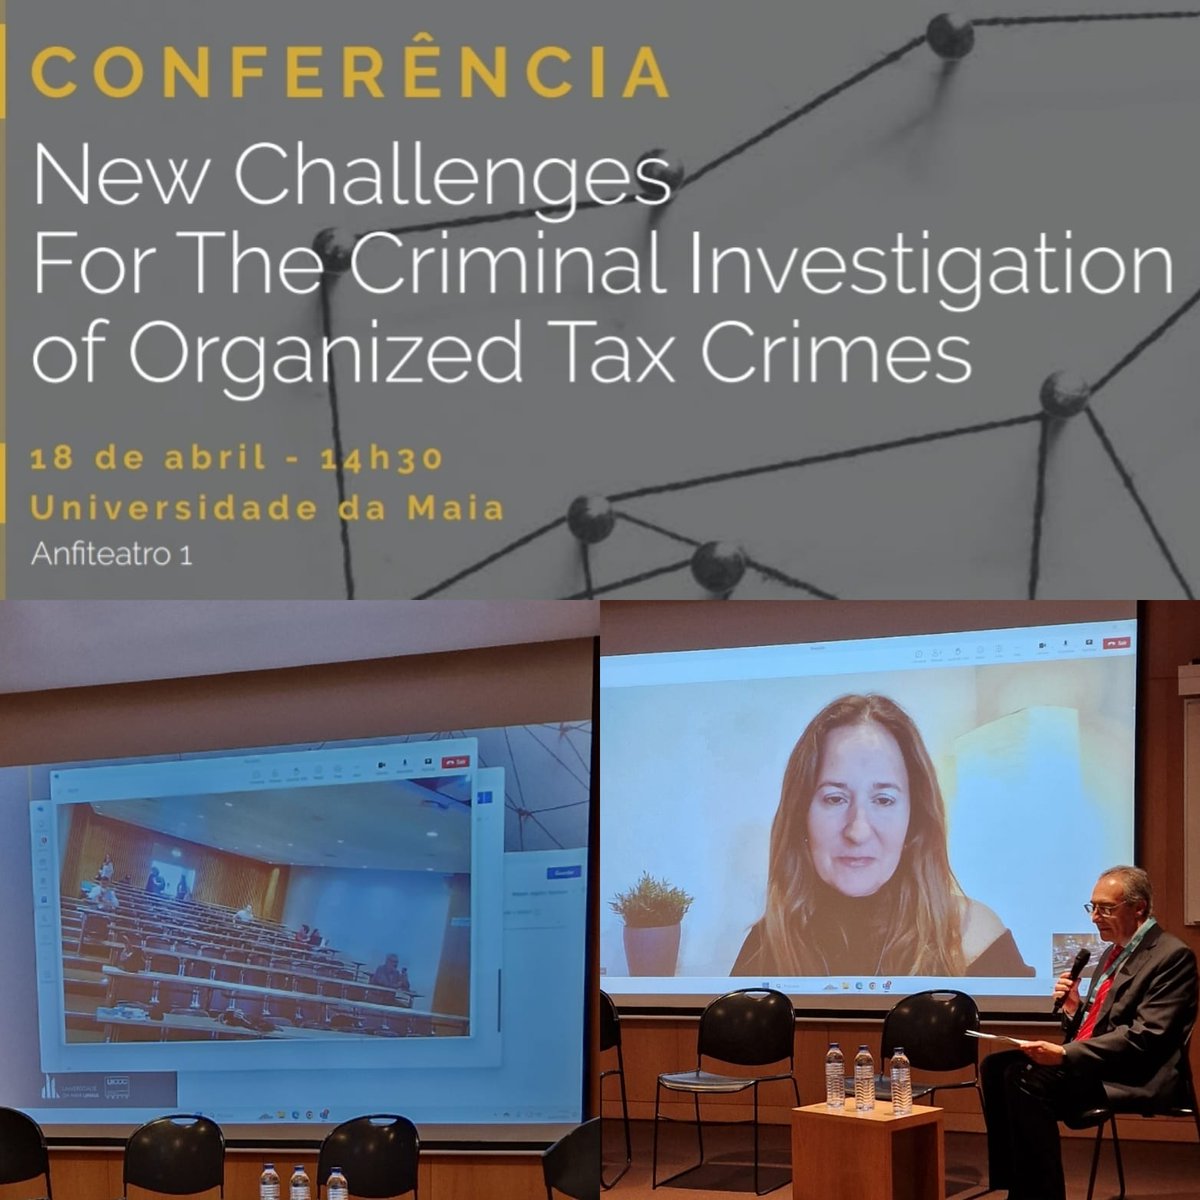 Keynoting yesterday in criminology on tax crimes. Advocating a better understanding of the phenomenon, and alerting to the risks of developing fallacies: revenue maximisation and AI unconstrained success. Thank you again to @pasousapt and @AnaGuerreiropt for the invitation.